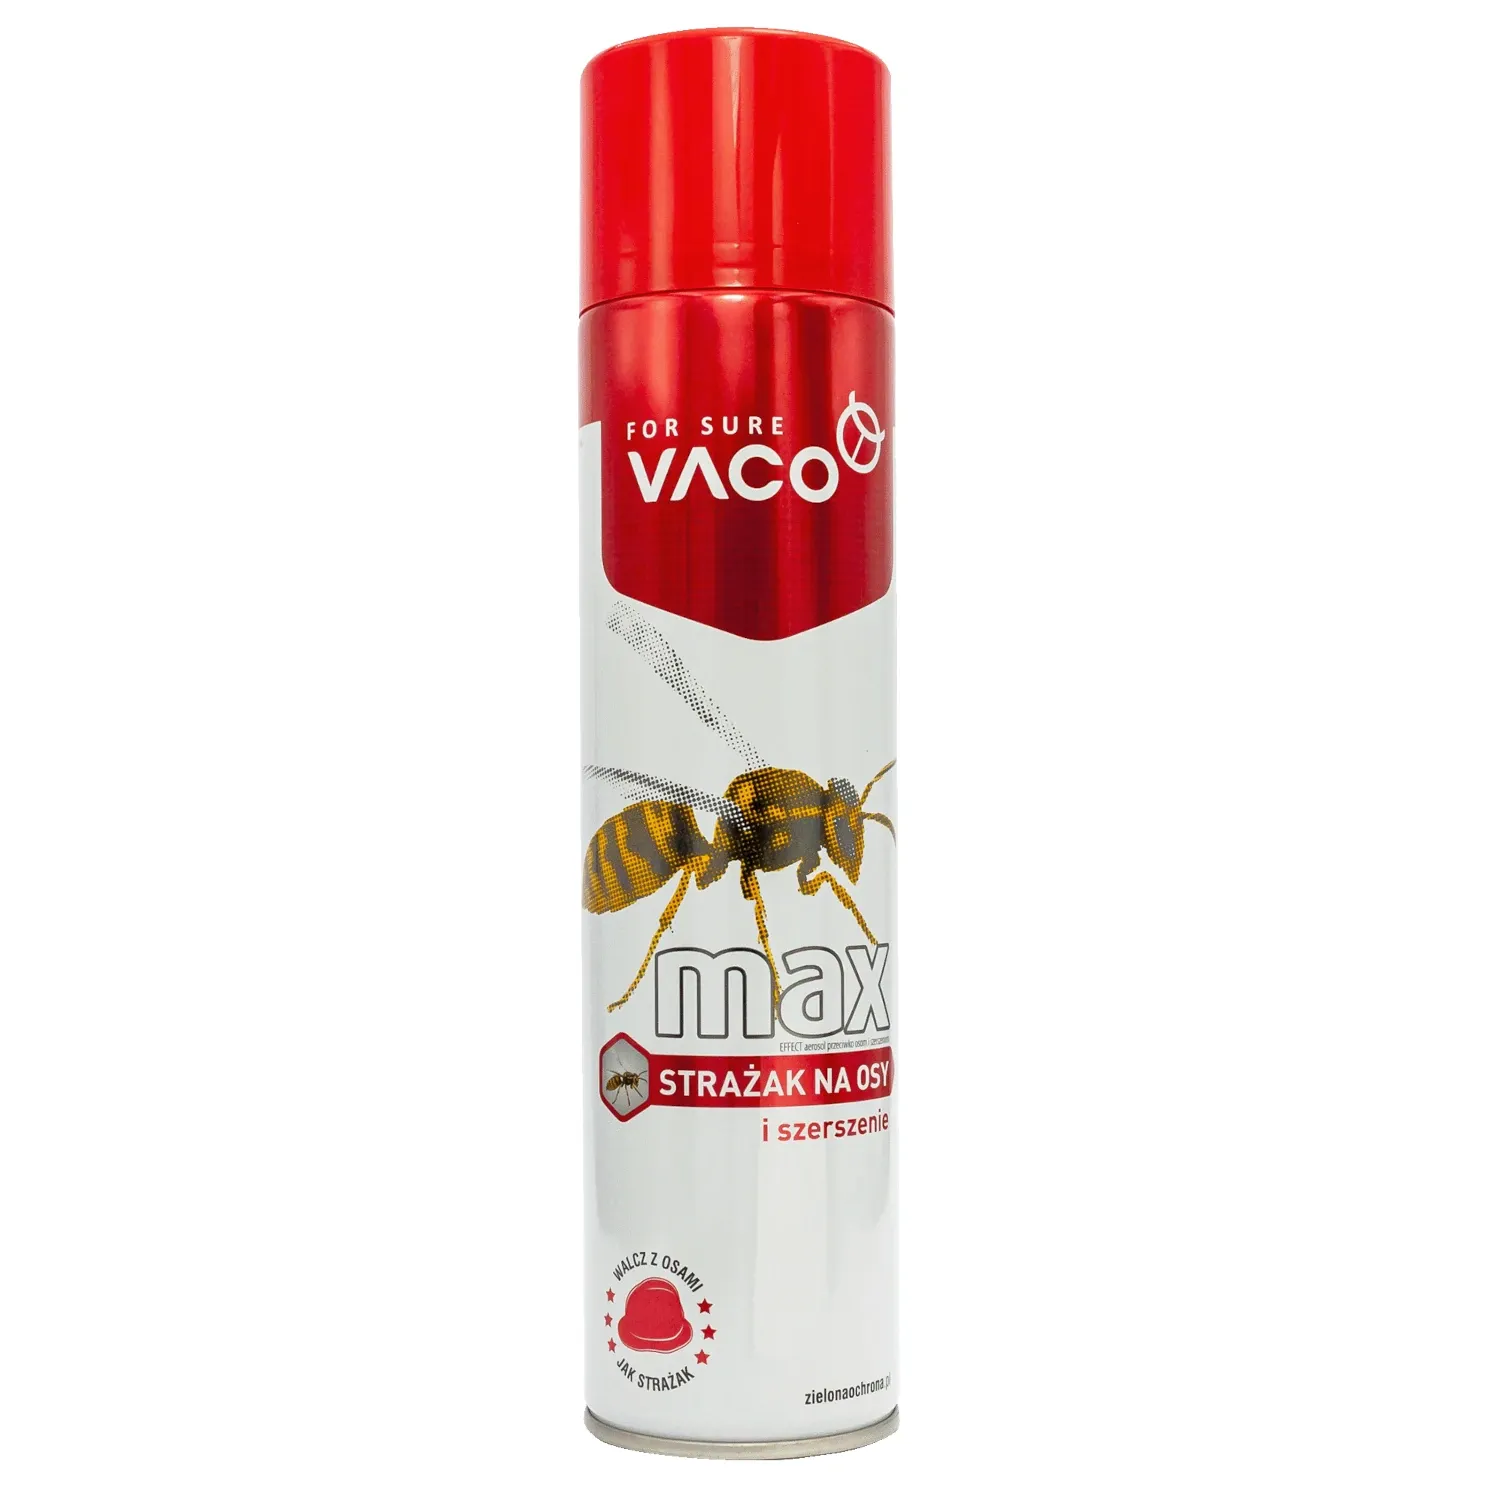 VACO Firefighter for wasps MAX